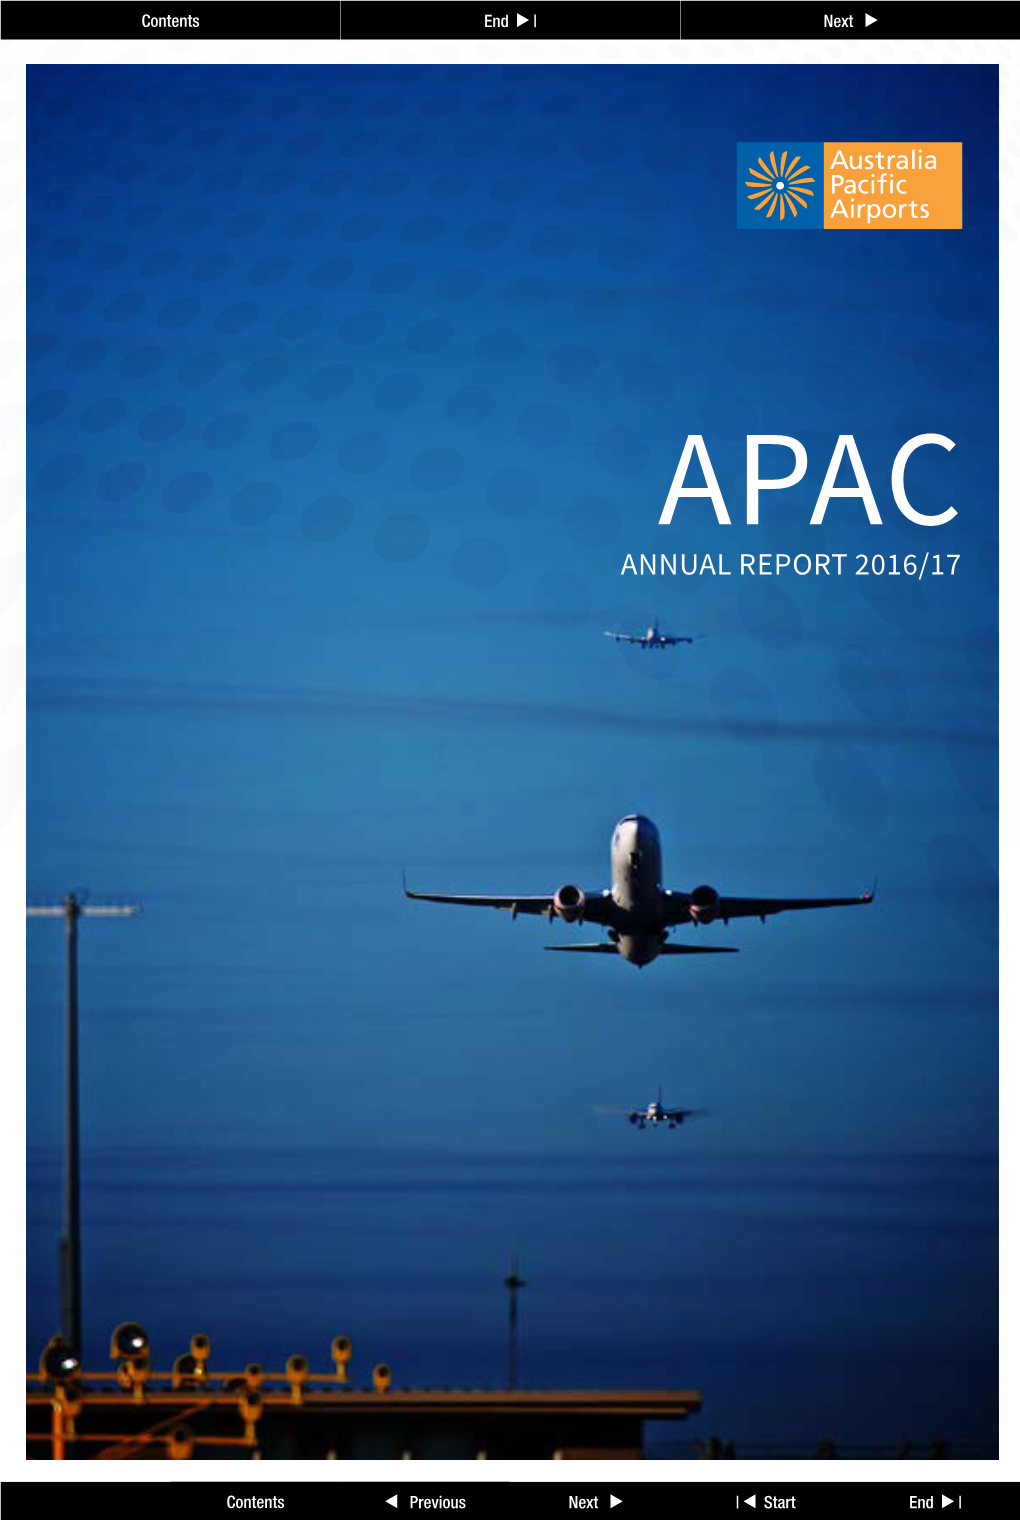 Apac Annual Report 2017 View The